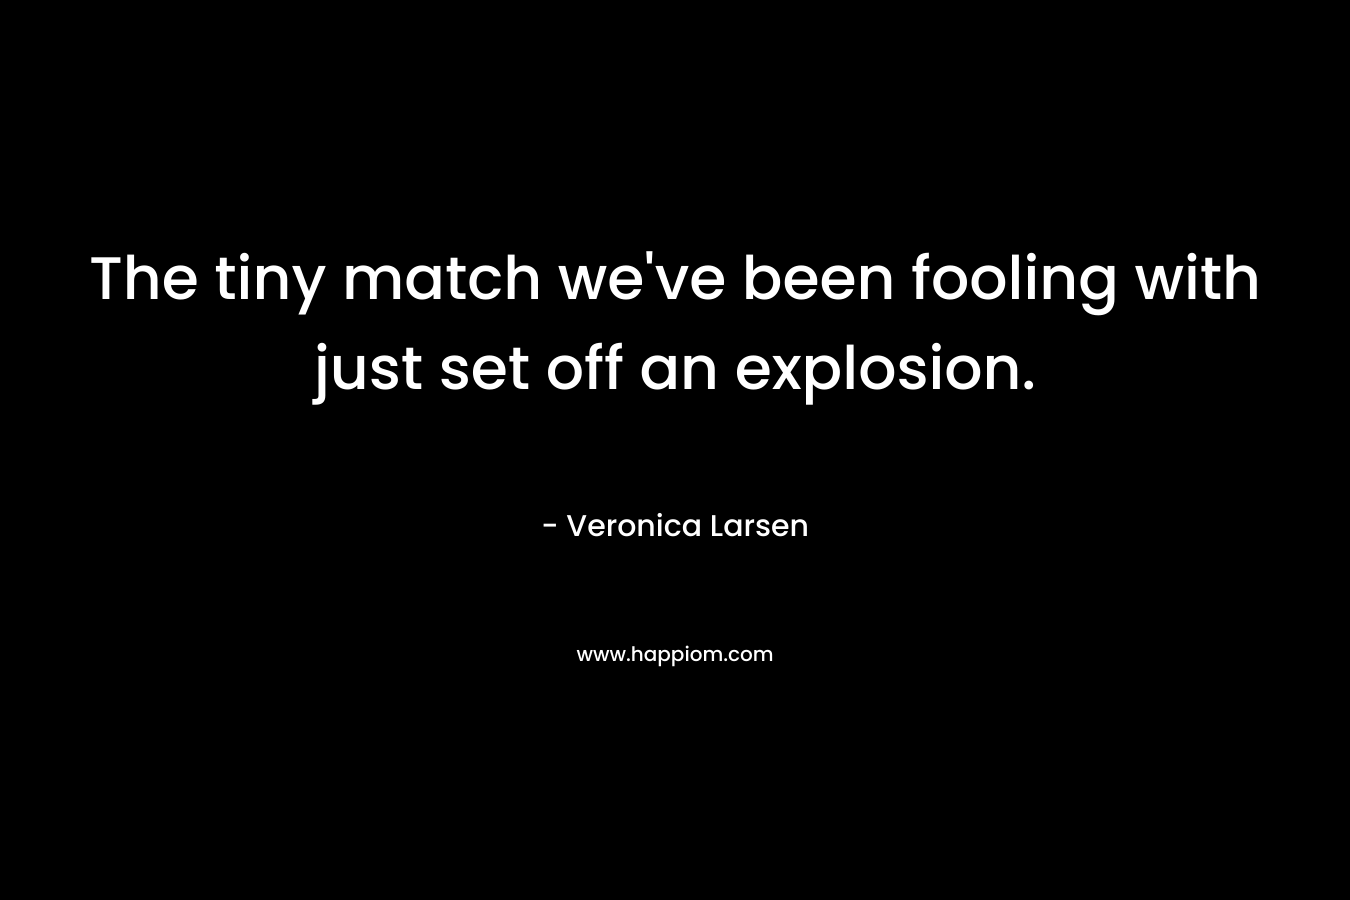 The tiny match we’ve been fooling with just set off an explosion. – Veronica Larsen